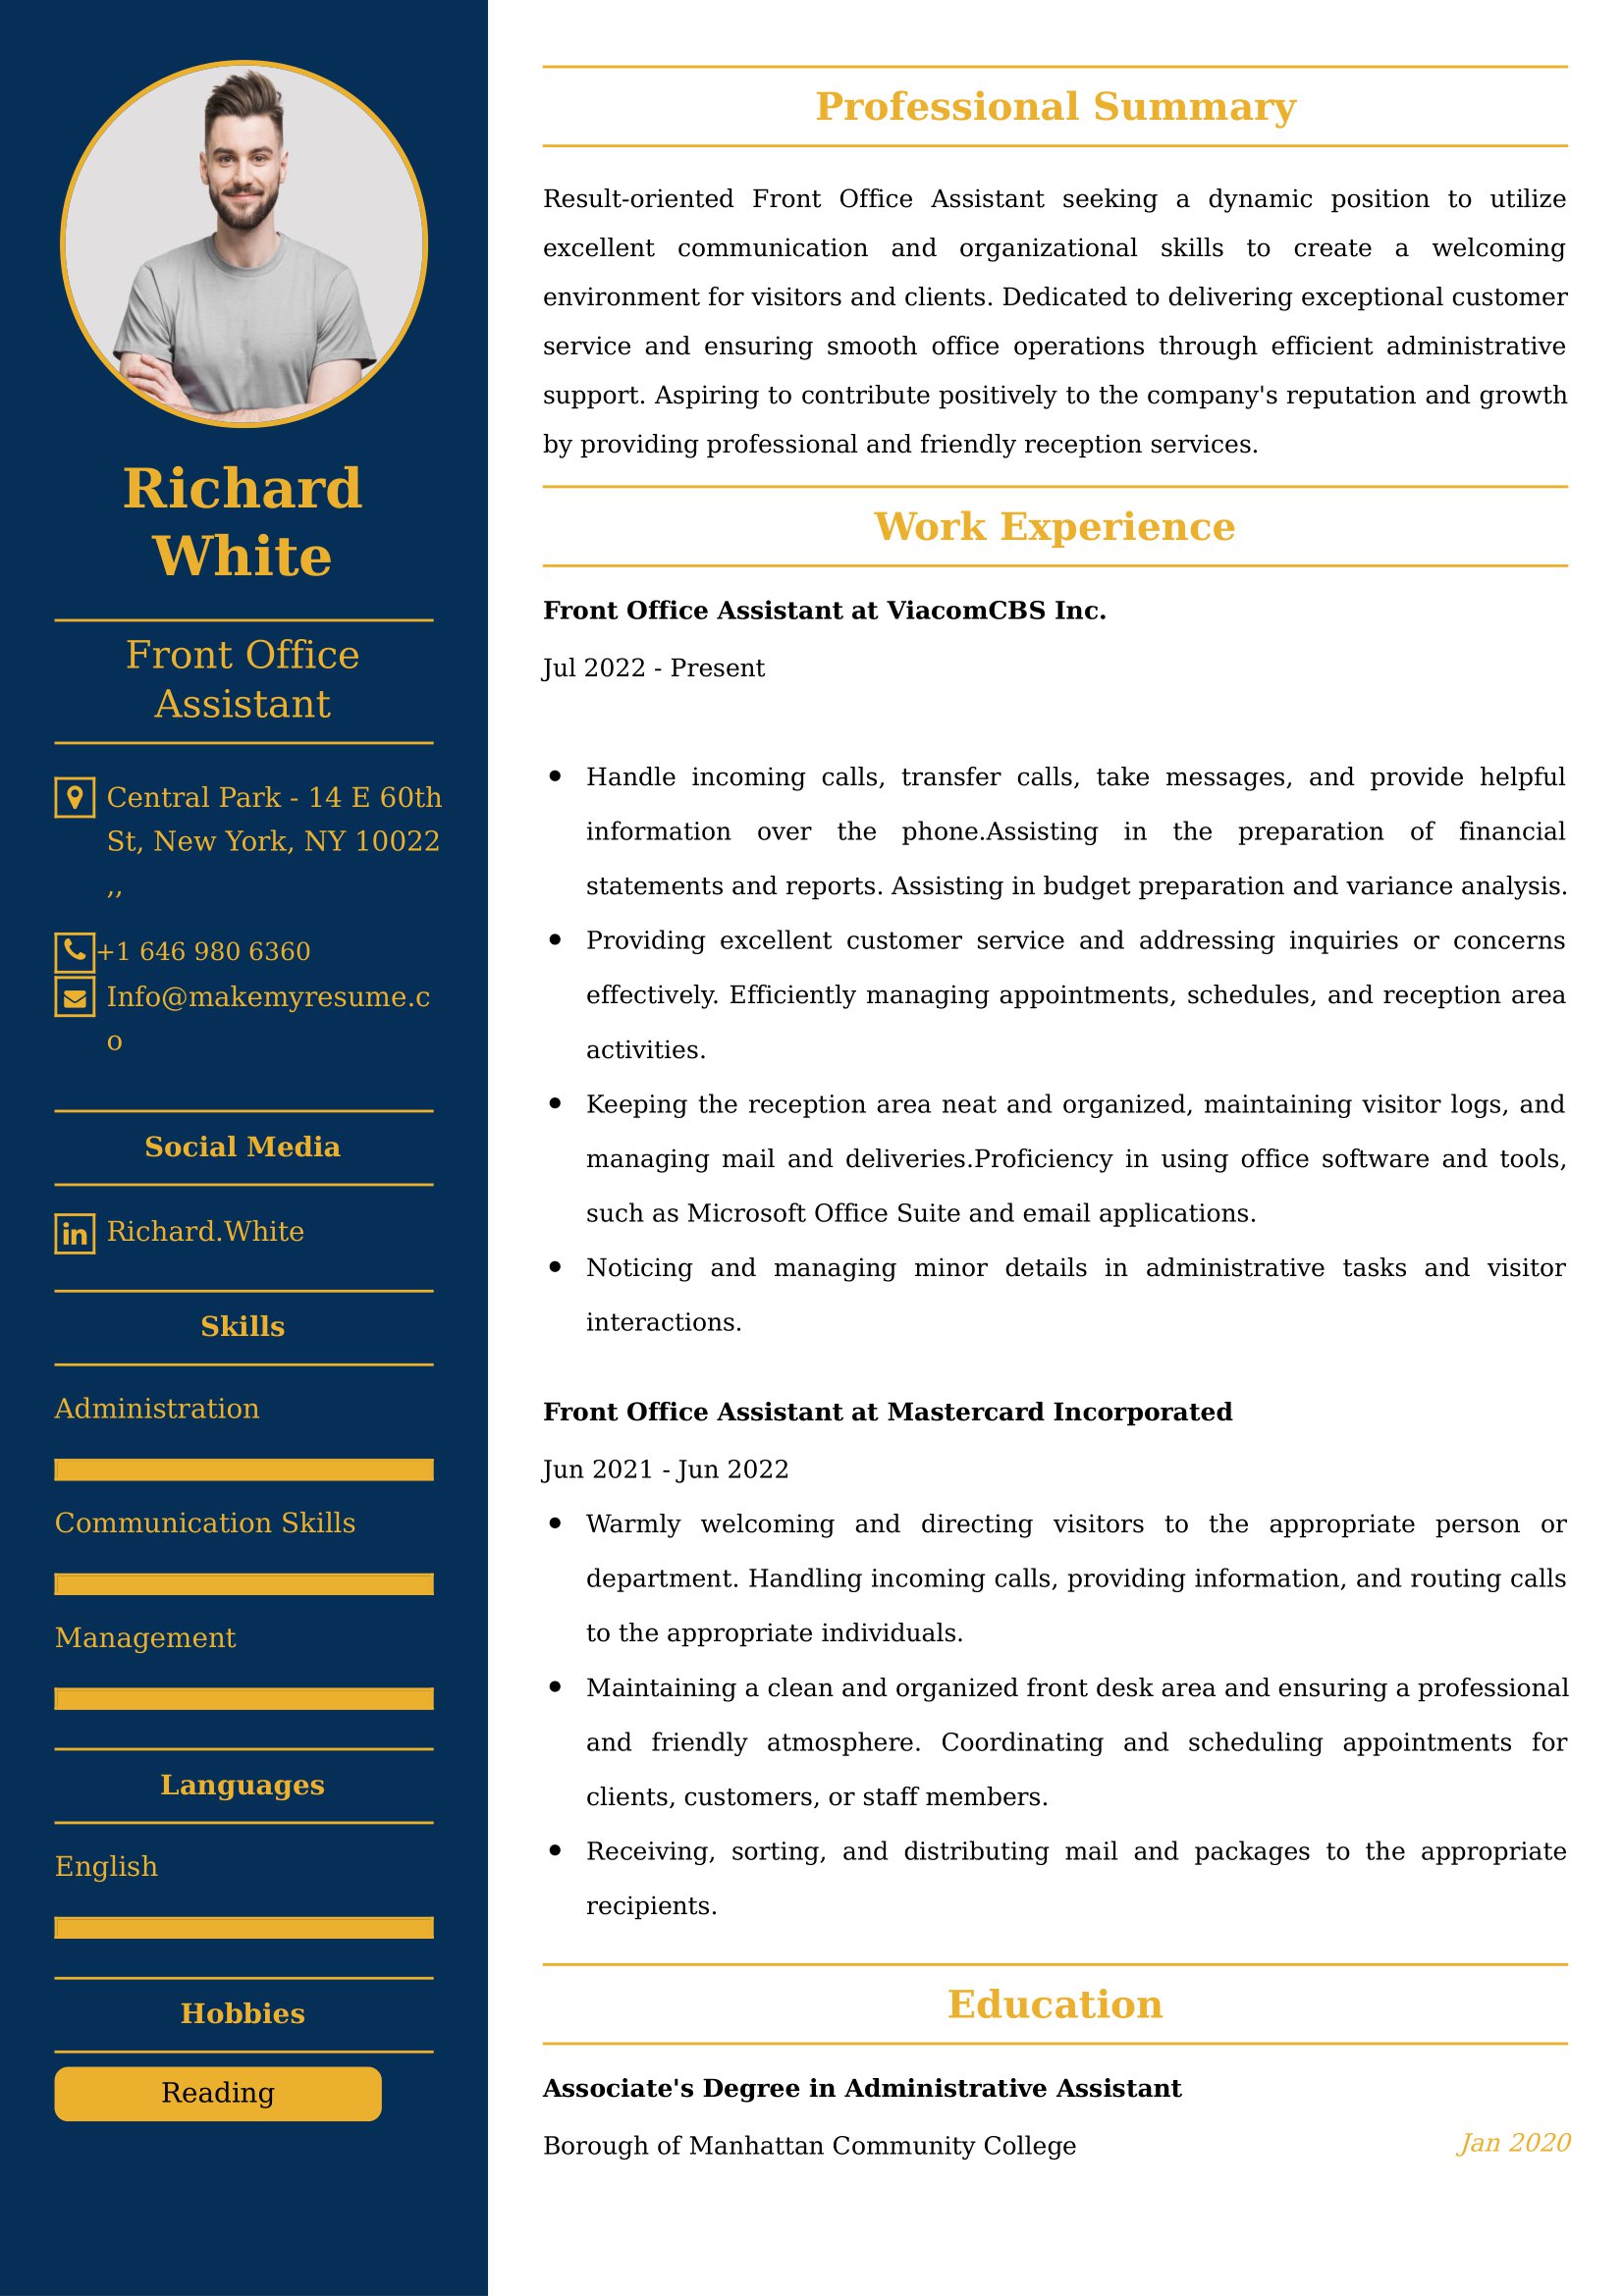 Front Office Assistant Resume Examples - Australian Format and Tips